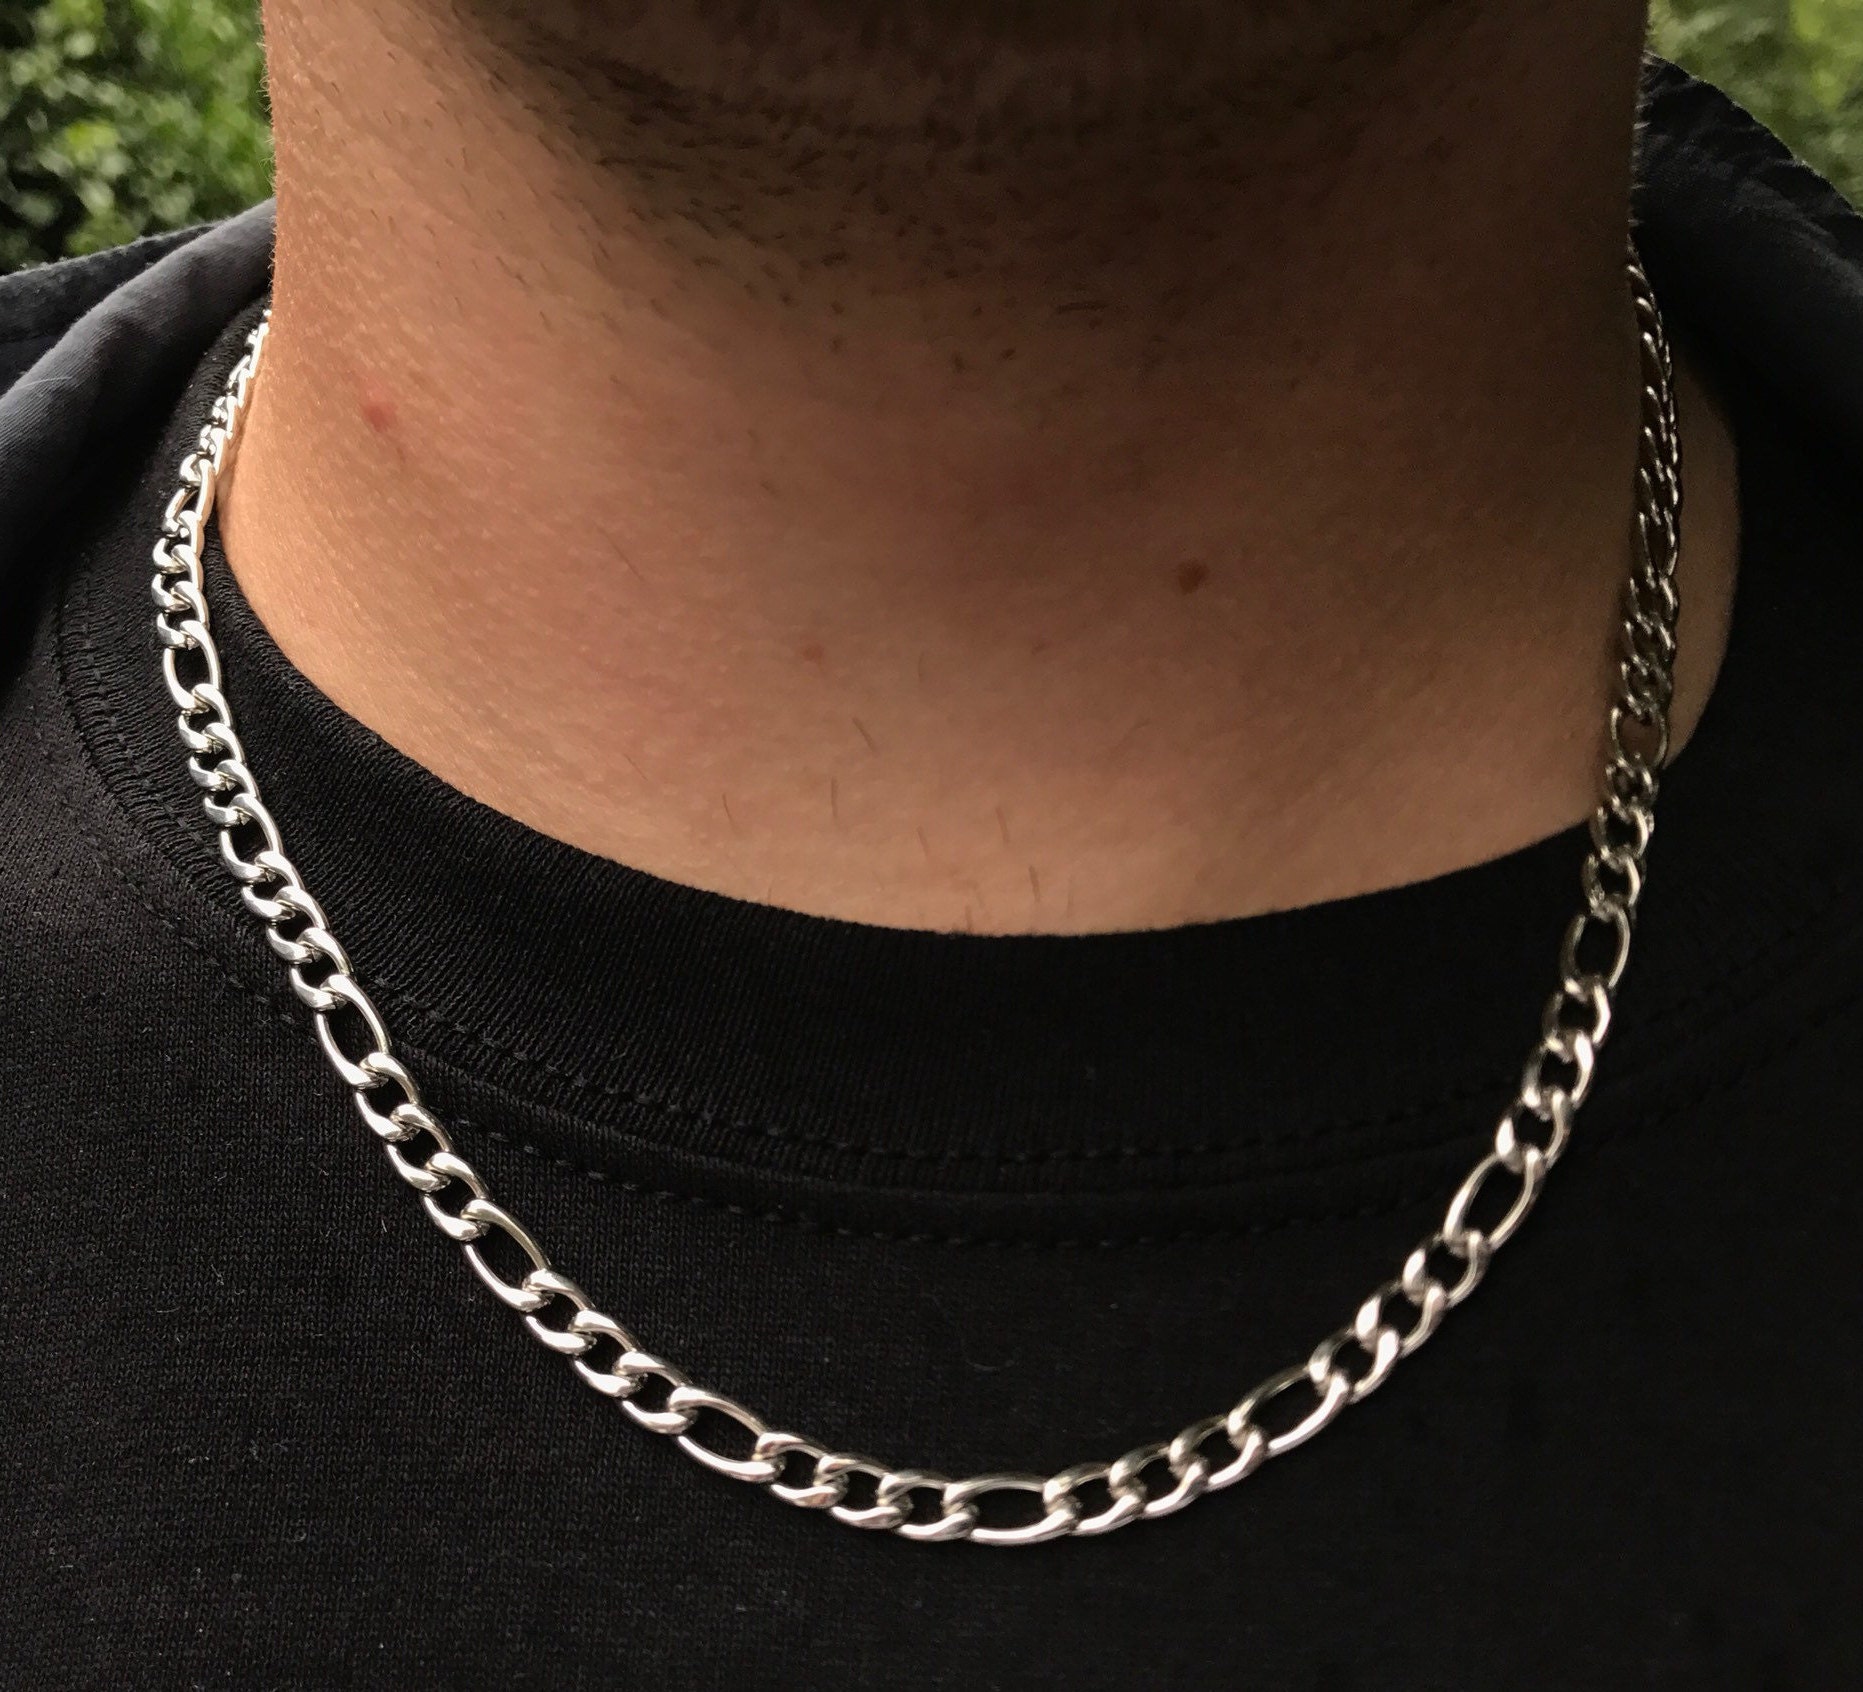 5mm Silver Snake Chain, Mens Necklace Chain, Silver Chain Mens